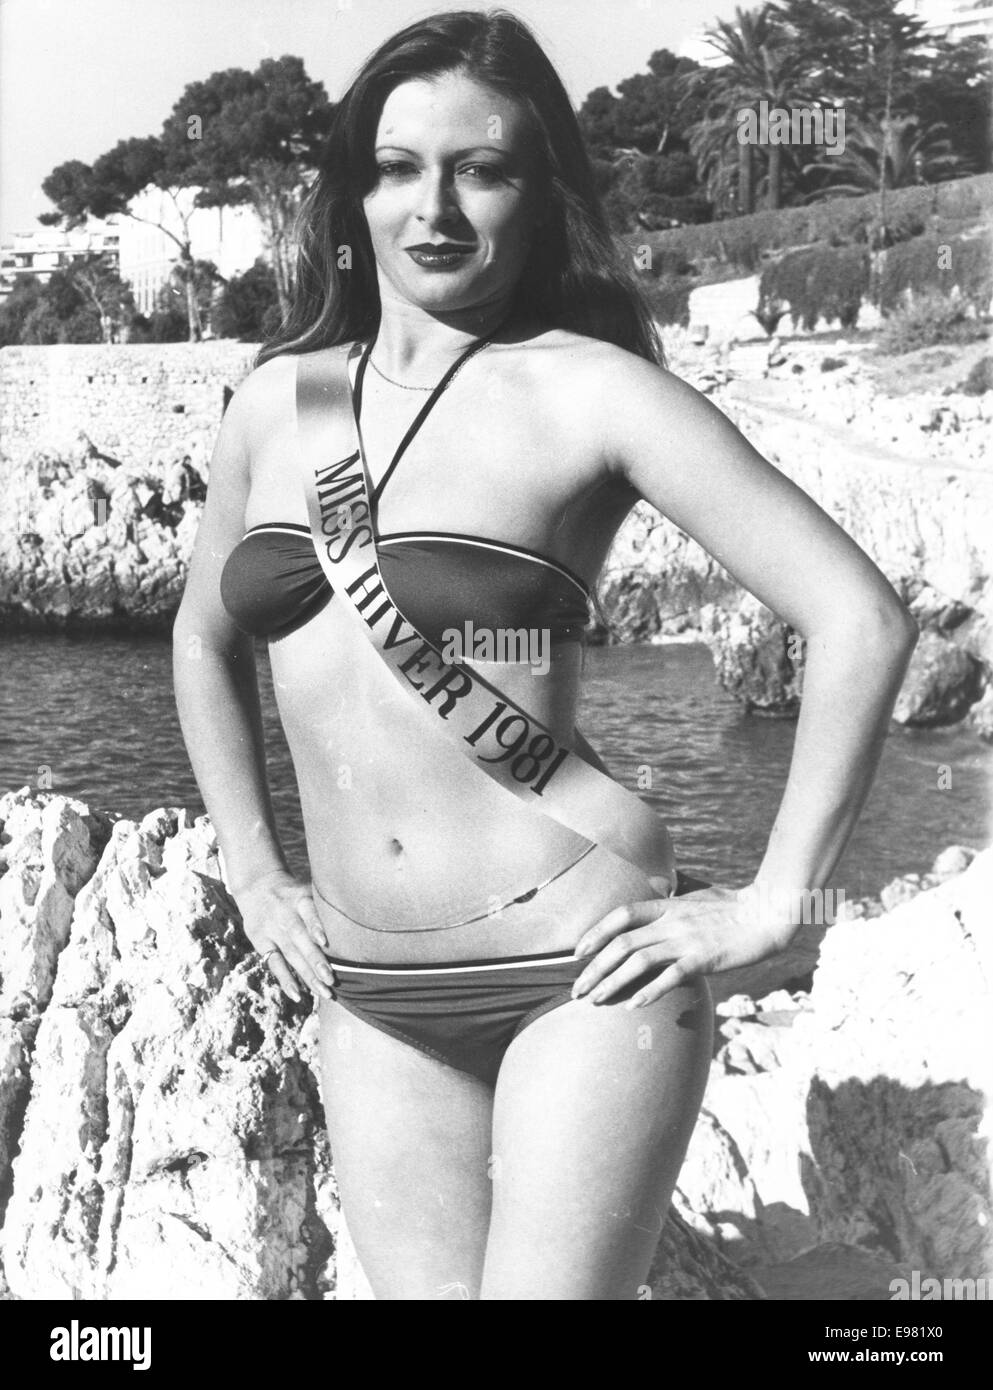 French Riviera, Mediterranean. 22nd Dec, 1980. The warm weather of the Cote d'Azur attracted the beautiful BRIGITTE BONI, 22-years-old, who won the title of Miss Winter 1981. The actress is currently shooting a movie. © KEYSTONE Pictures/ZUMA Wire/ZUMAPRESS.com/Alamy Live News Stock Photo